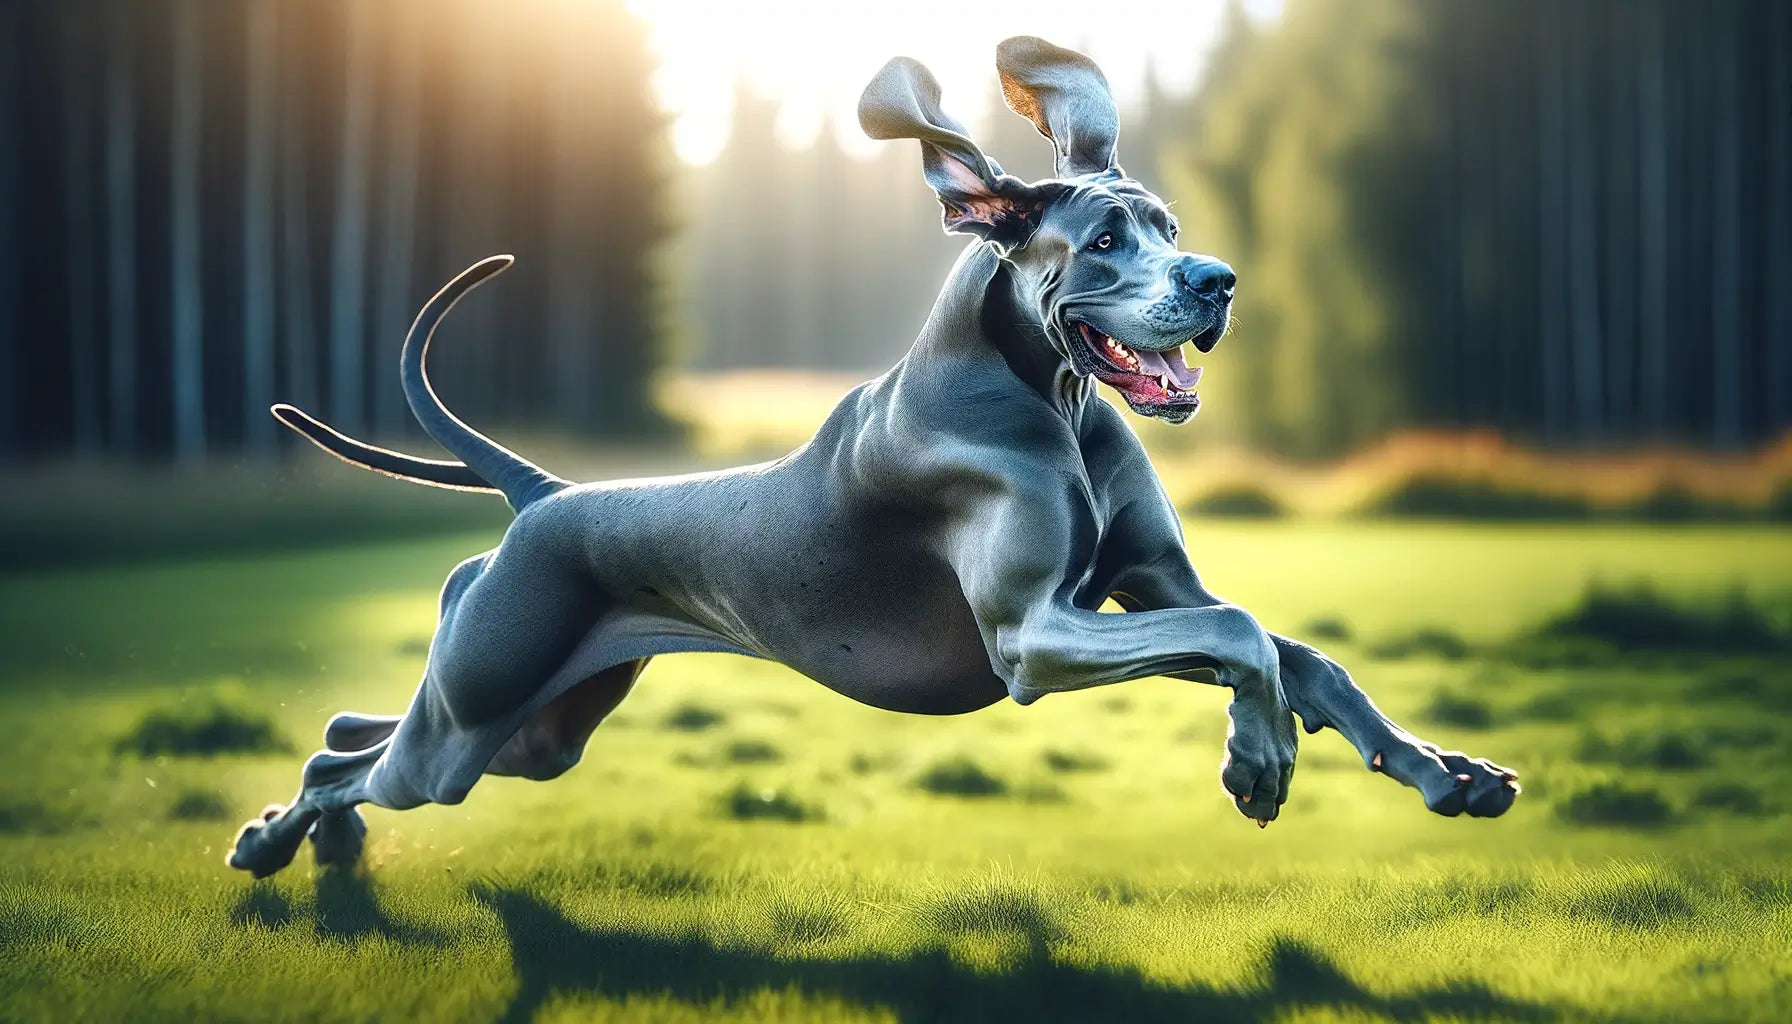 Blue Great Dane in mid-stride across a field, its joyful demeanor and flowing coat highlighting the breed's energetic and playful spirit.